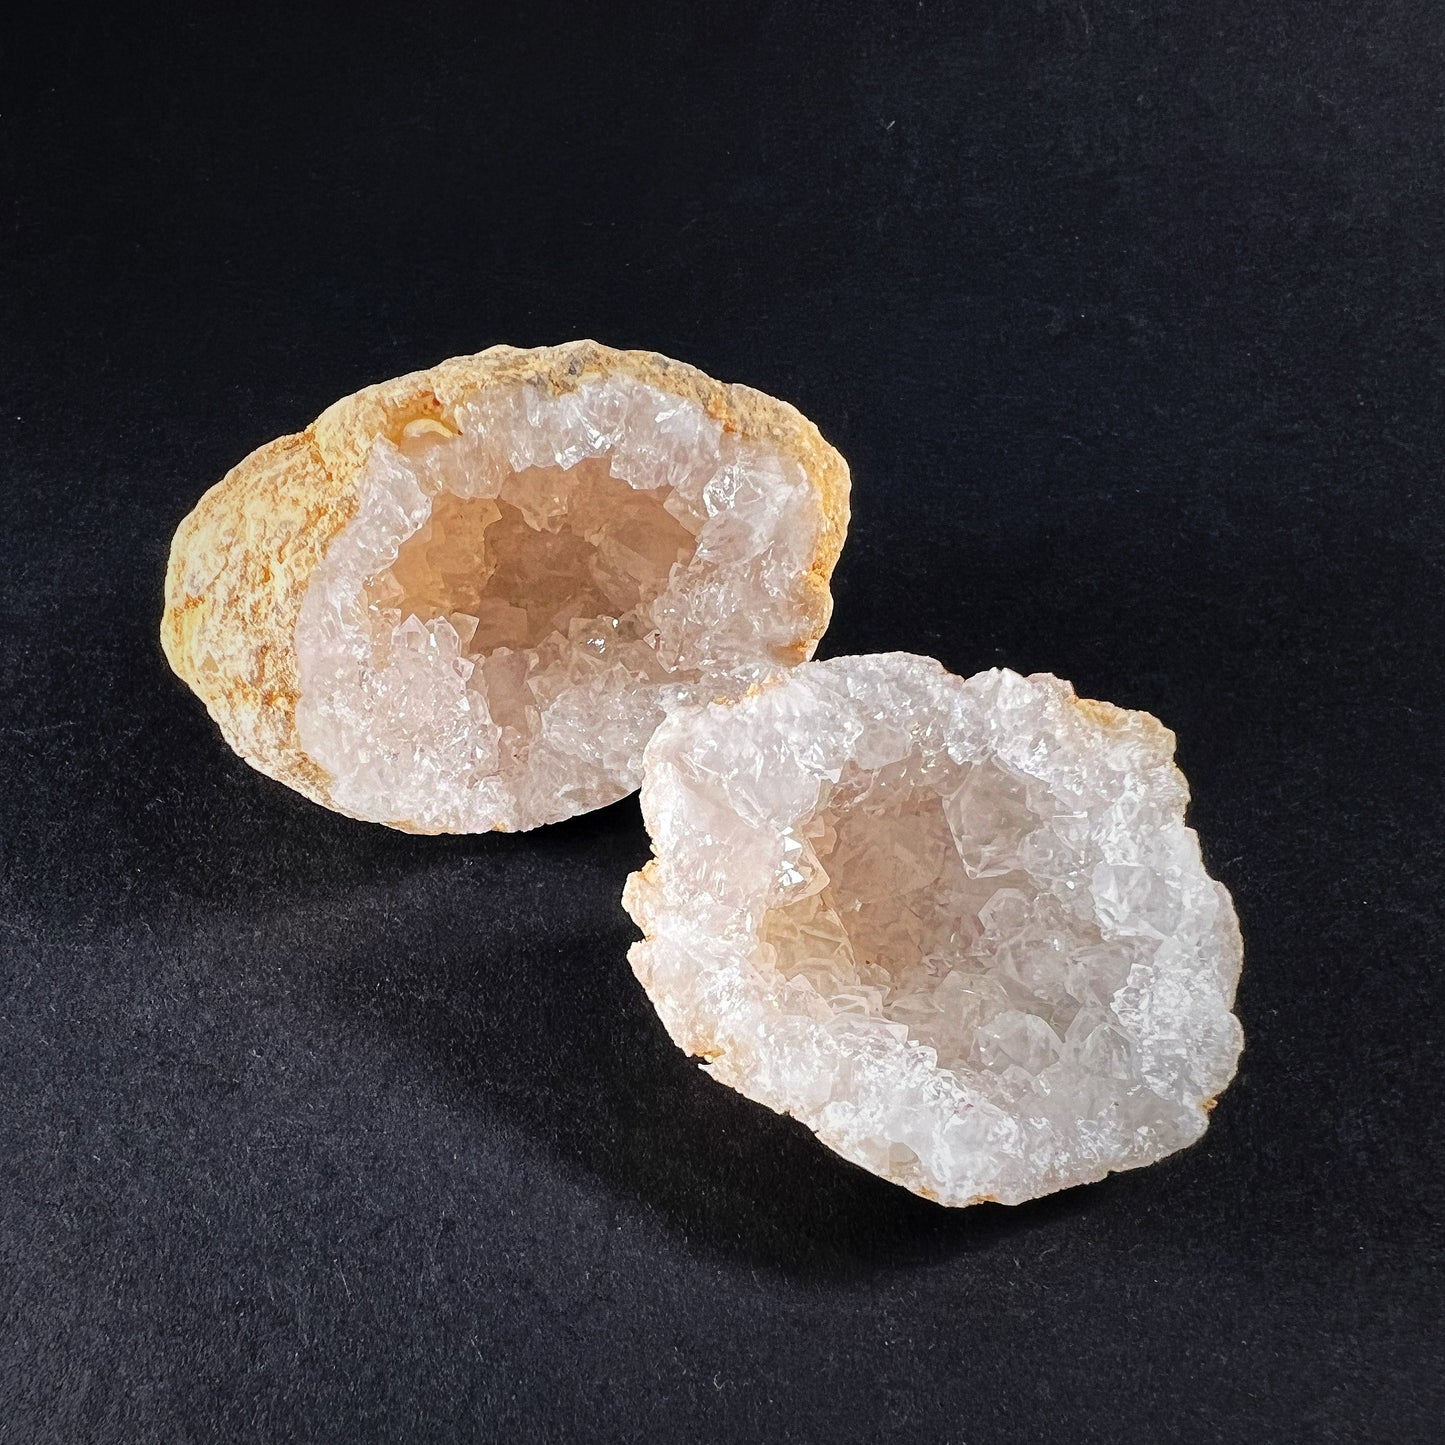 Quartz geode (whole), bathed in the full moon light